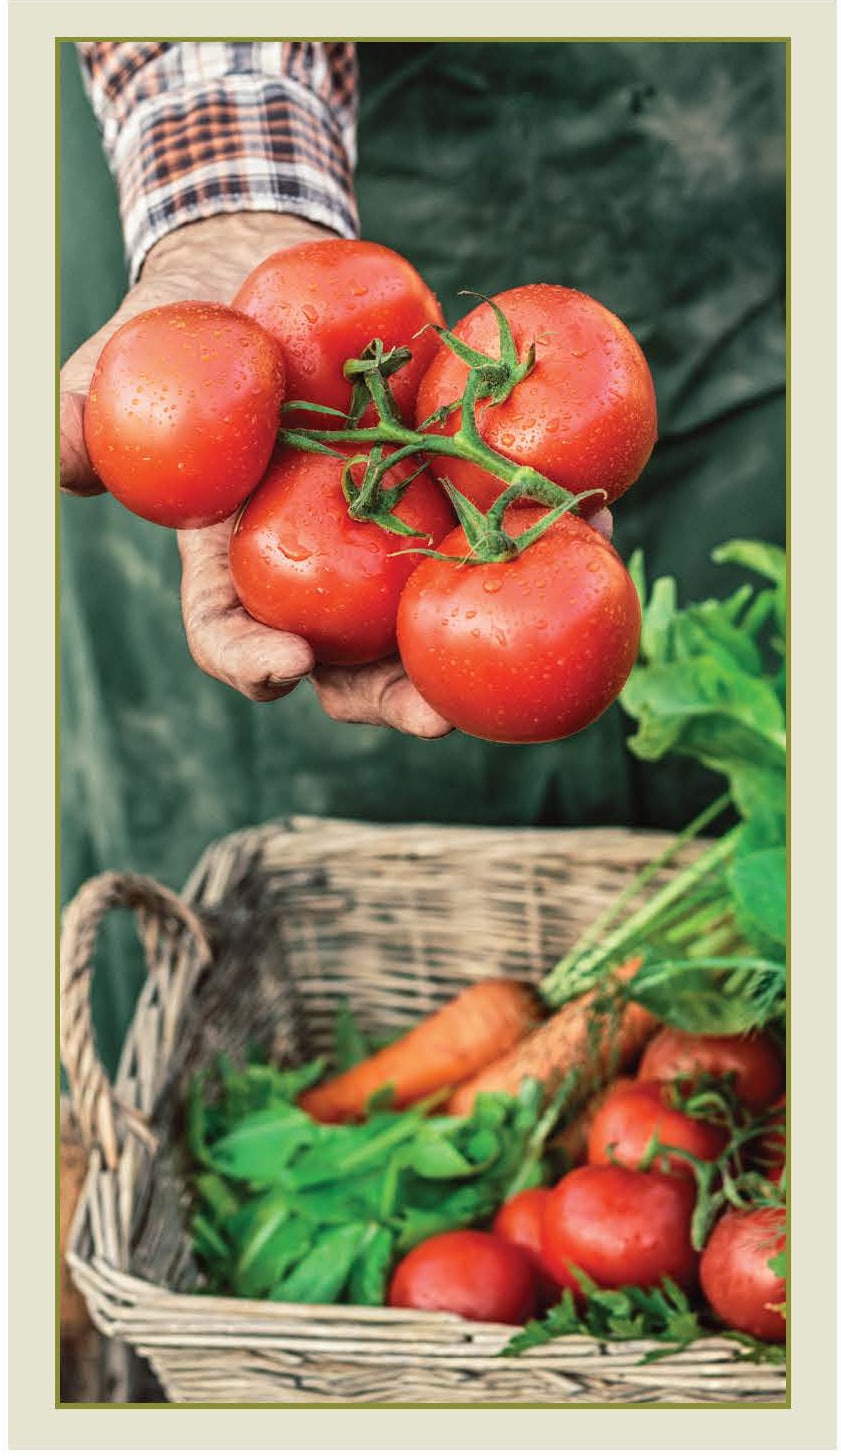 farmer holding tomatoes over basket of tomatoes